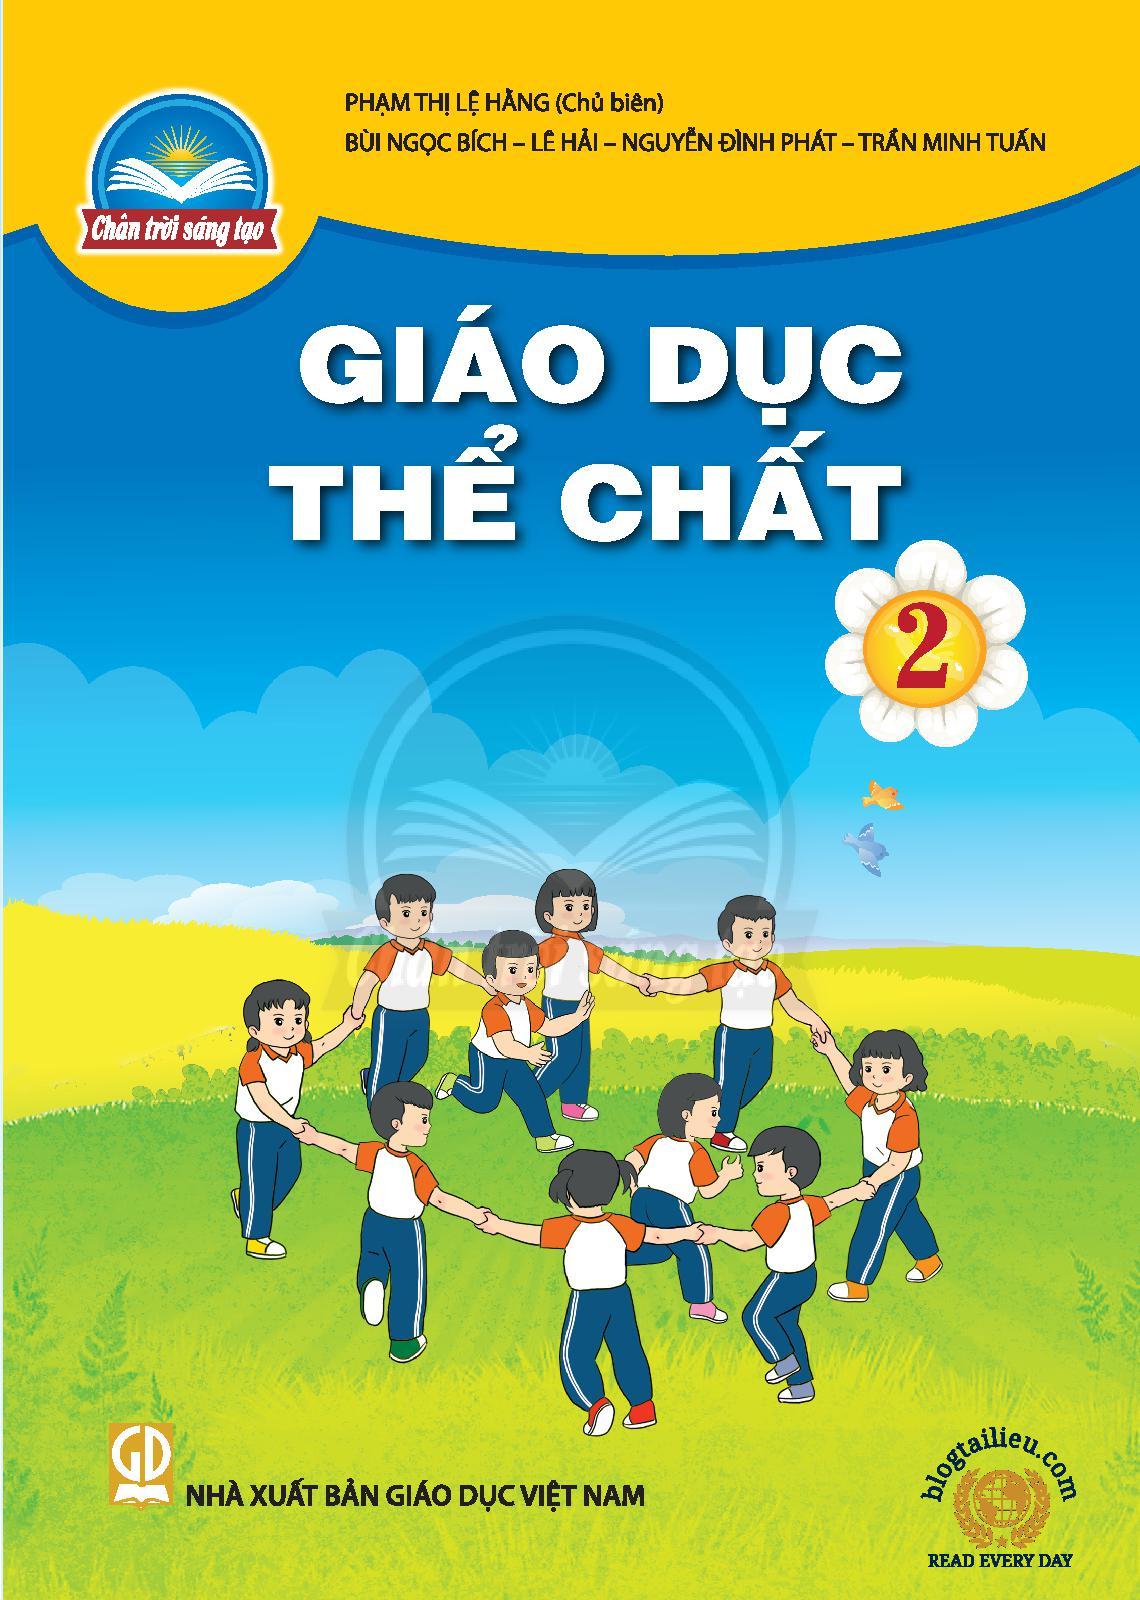 giao-duc-the-chat-2-1006